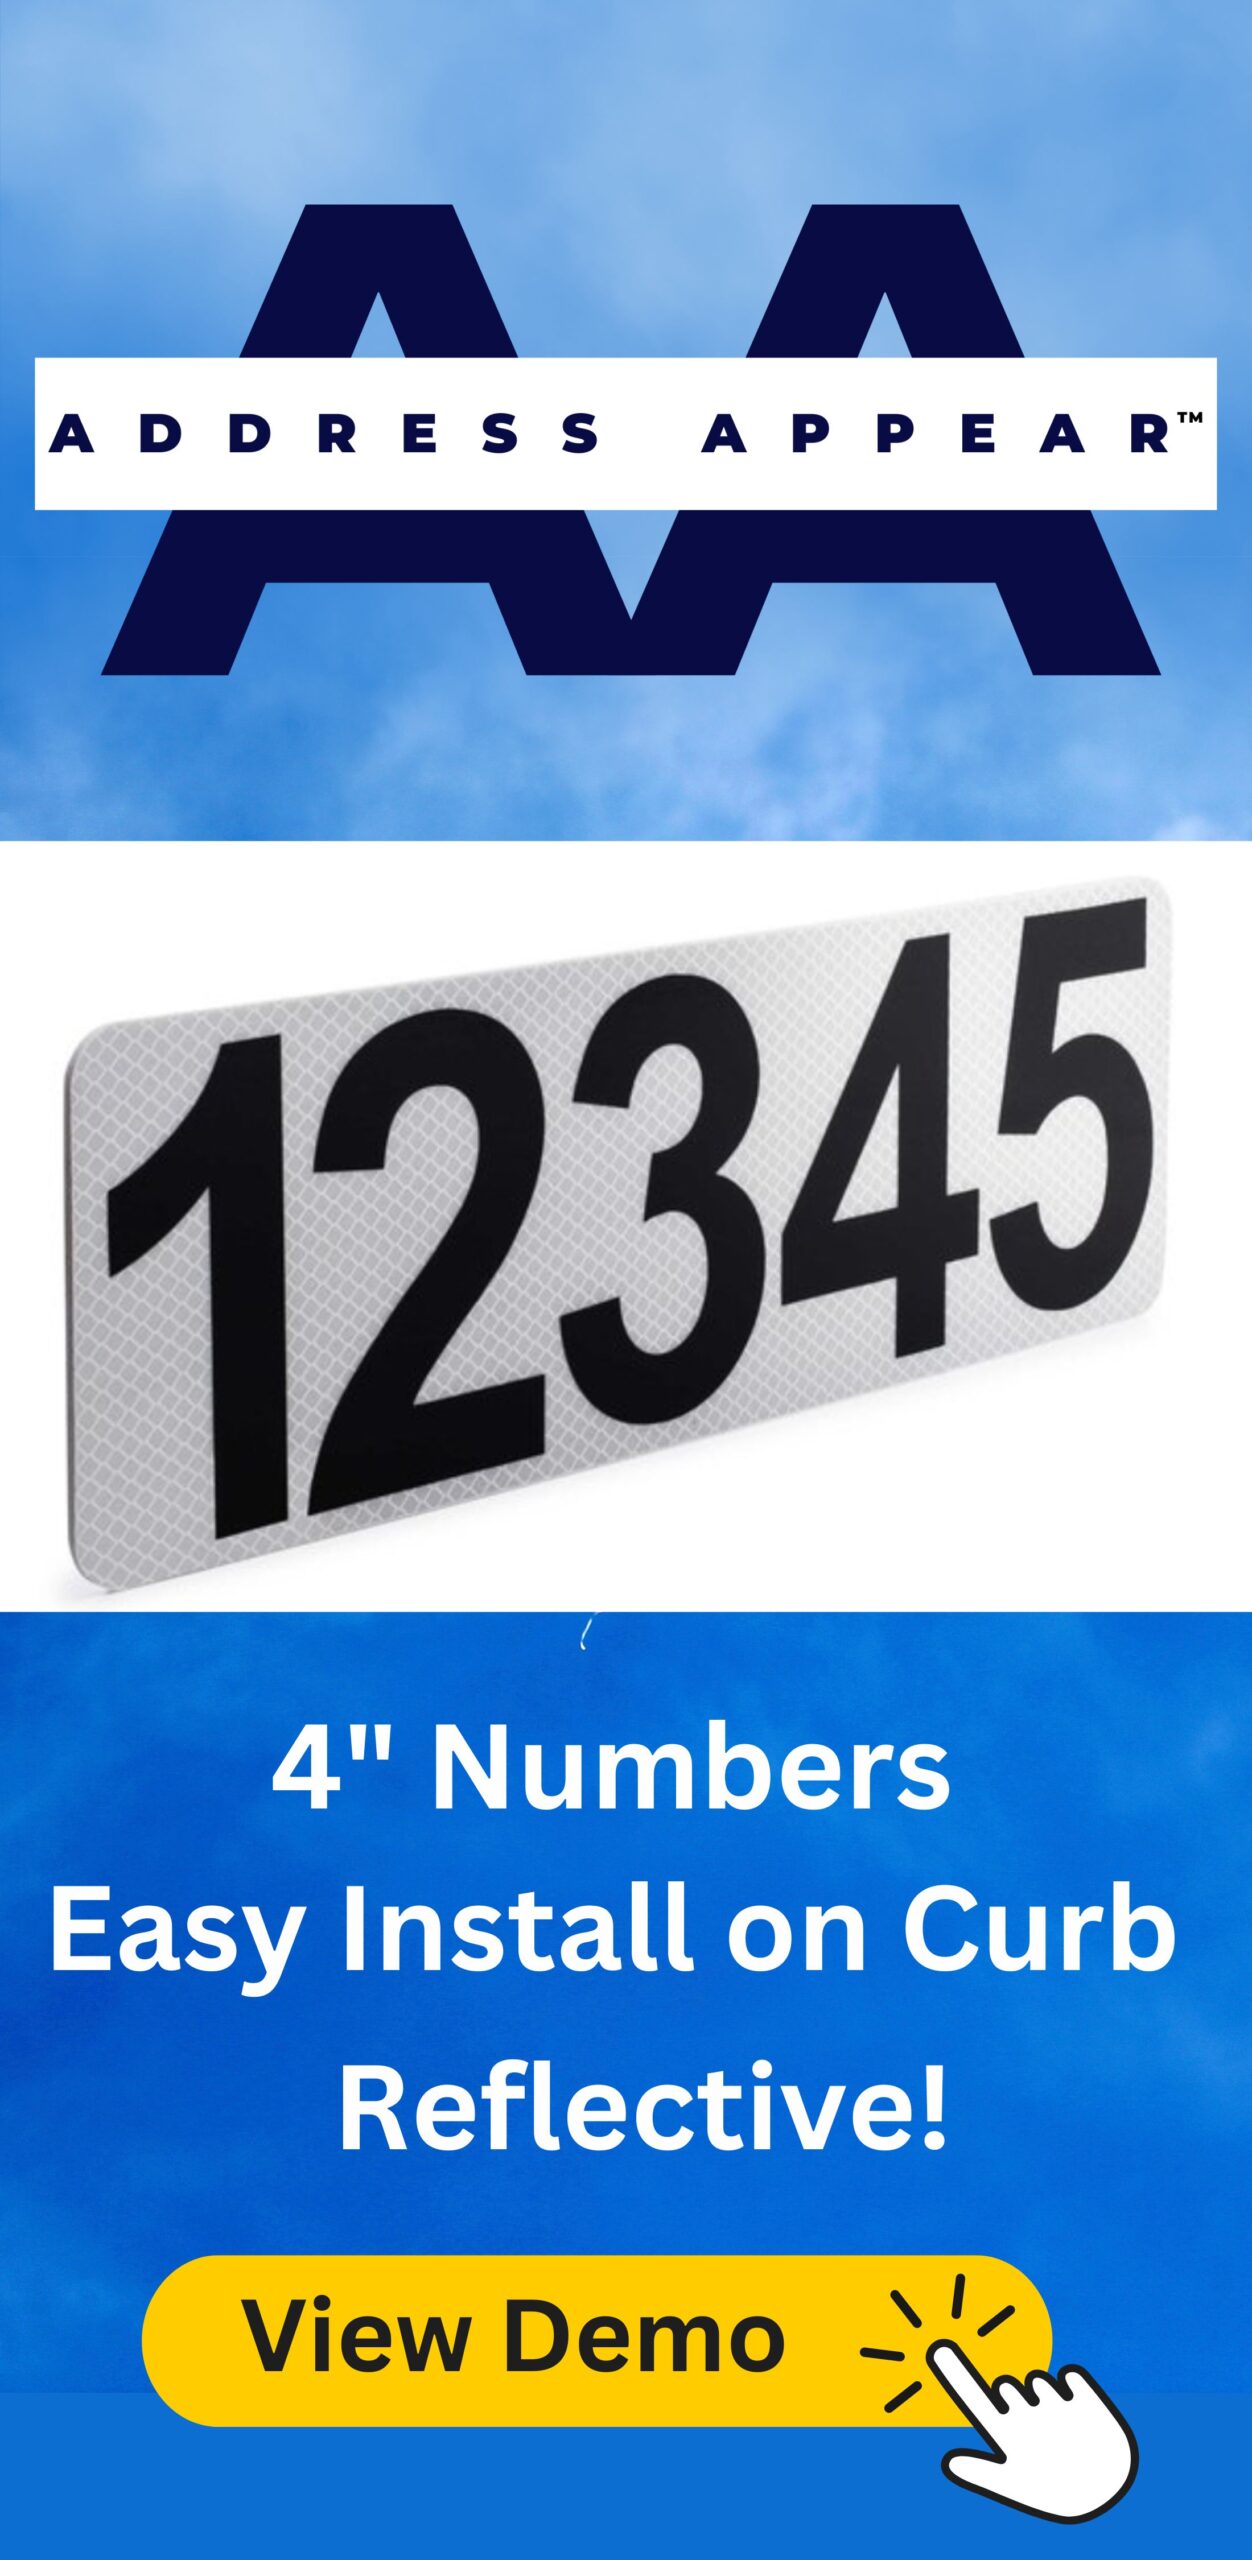 Address Appear MFG. offers a very reflective, easy to install address plate that makes it easy for USPS, UPS and Amazon drivers to find your home, especially at night!. Give your home added safety as our address plates are recommended by police, fire depts. and first responders